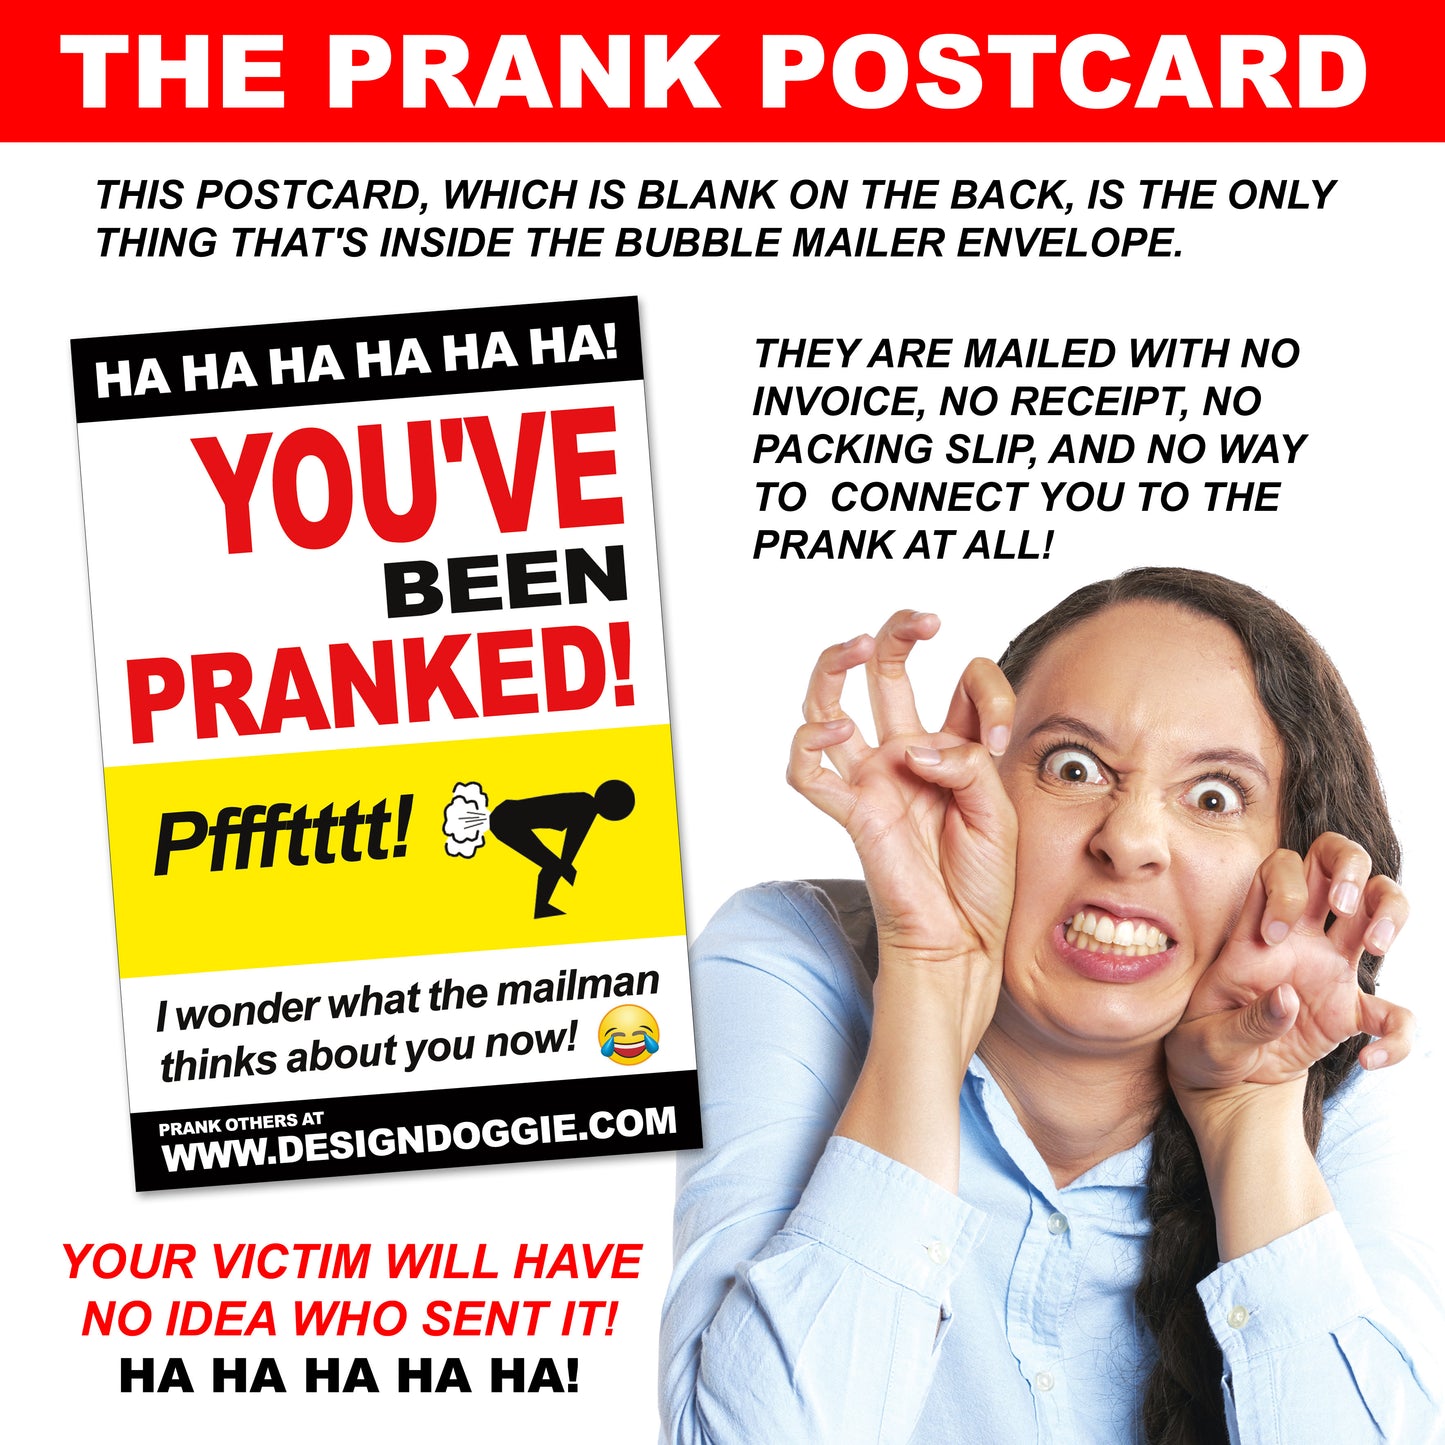 Penile Research Labs embarrassing prank envelope gets mailed directly to your victims 100% anonymously!